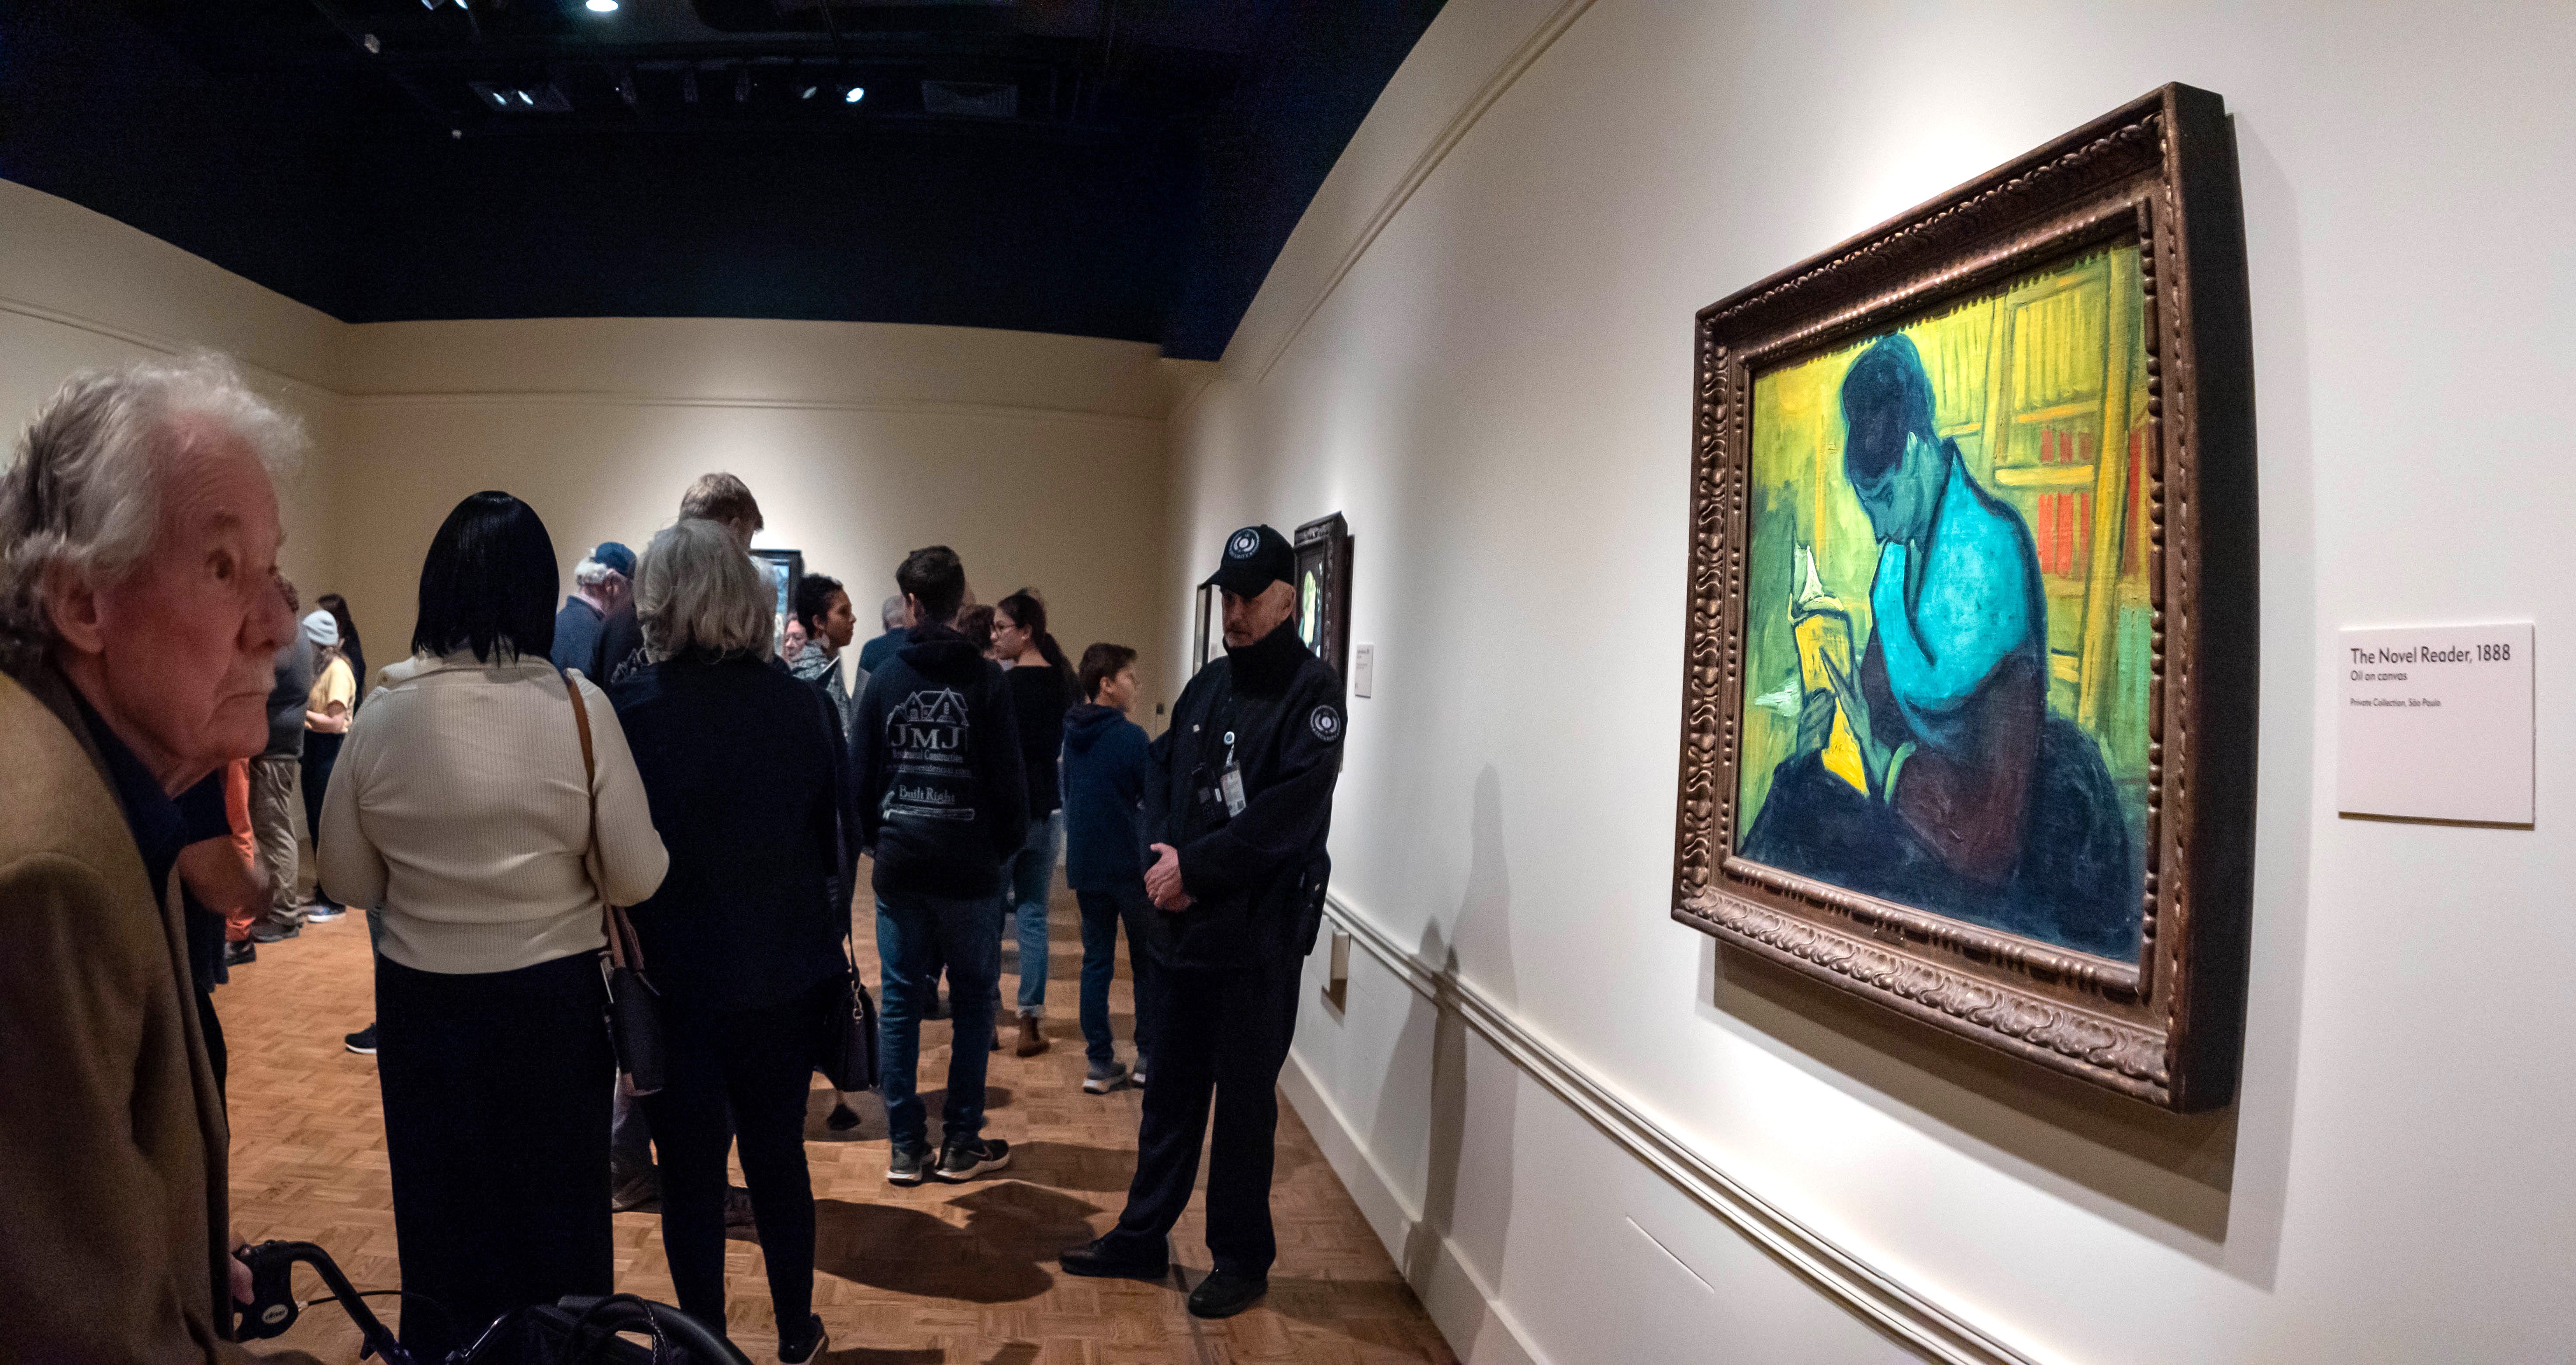 Visitors file past at the Van Gogh painting "Liseuse De Romans"  also known as "The Novel Reader", as a security guard stands near the painting, during the Van Gogh in America exhibit at the Detroit institute of Arts, Wednesday, Jan. 11, 2023. Brazilian art collector Gustavo Soter's art brokerage company, Brokerarte Capital Partners LLC, sued the DIA, describing an international hunt for a rare oil painting by the Dutch Post-Impressionist master.